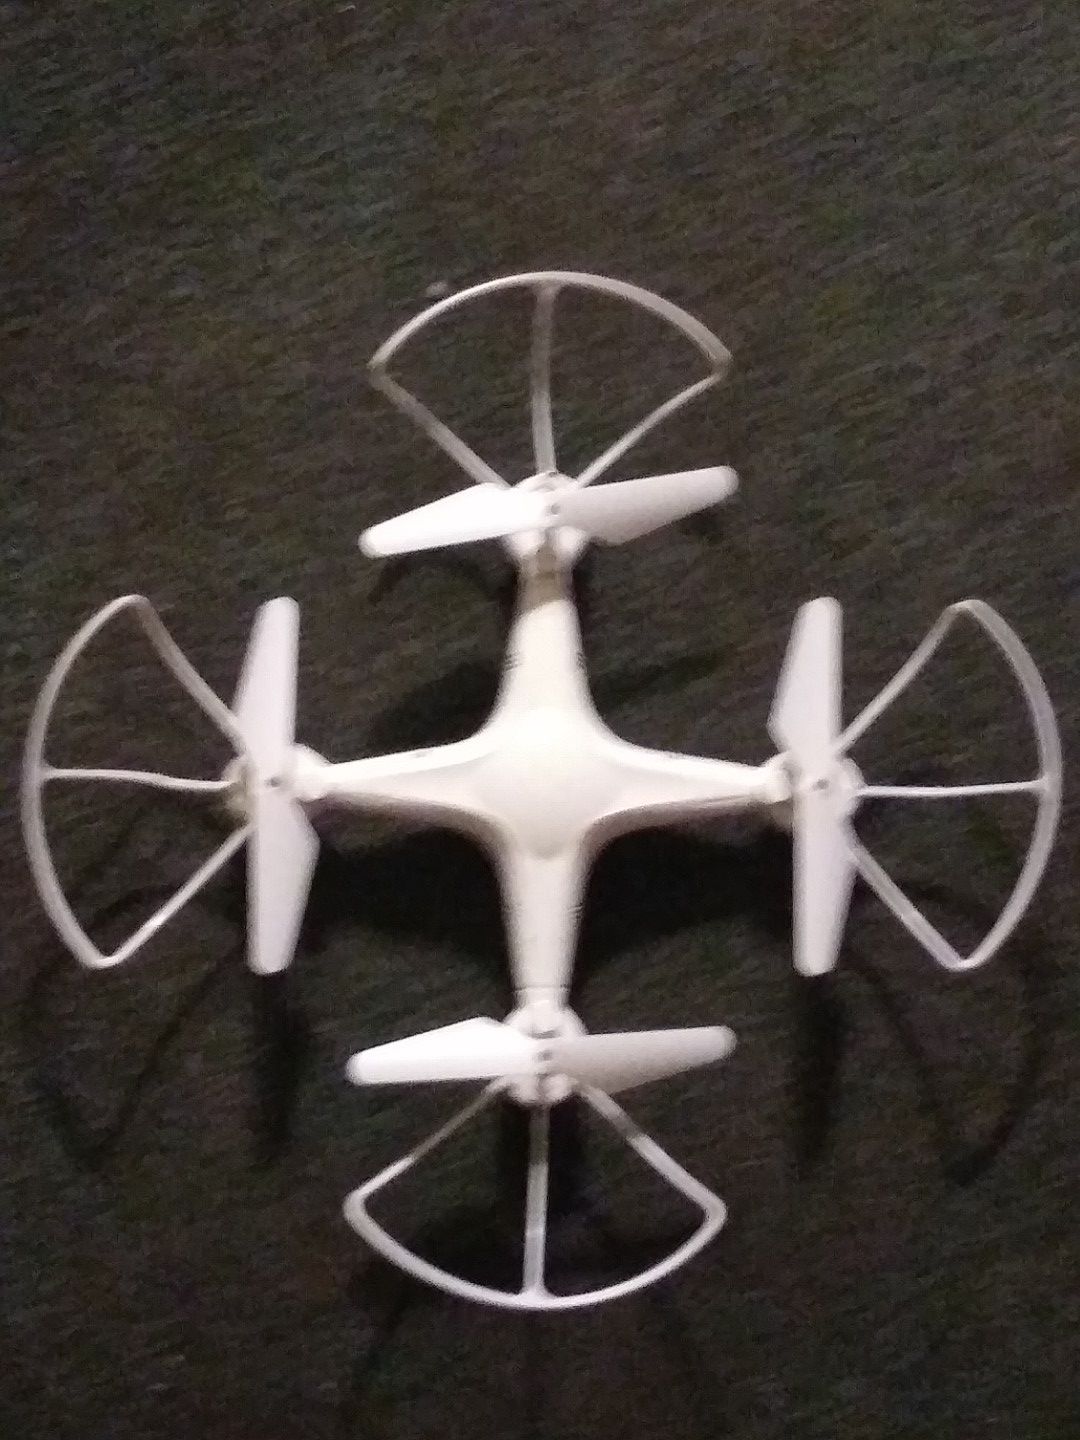 Five below DRONE with video camera